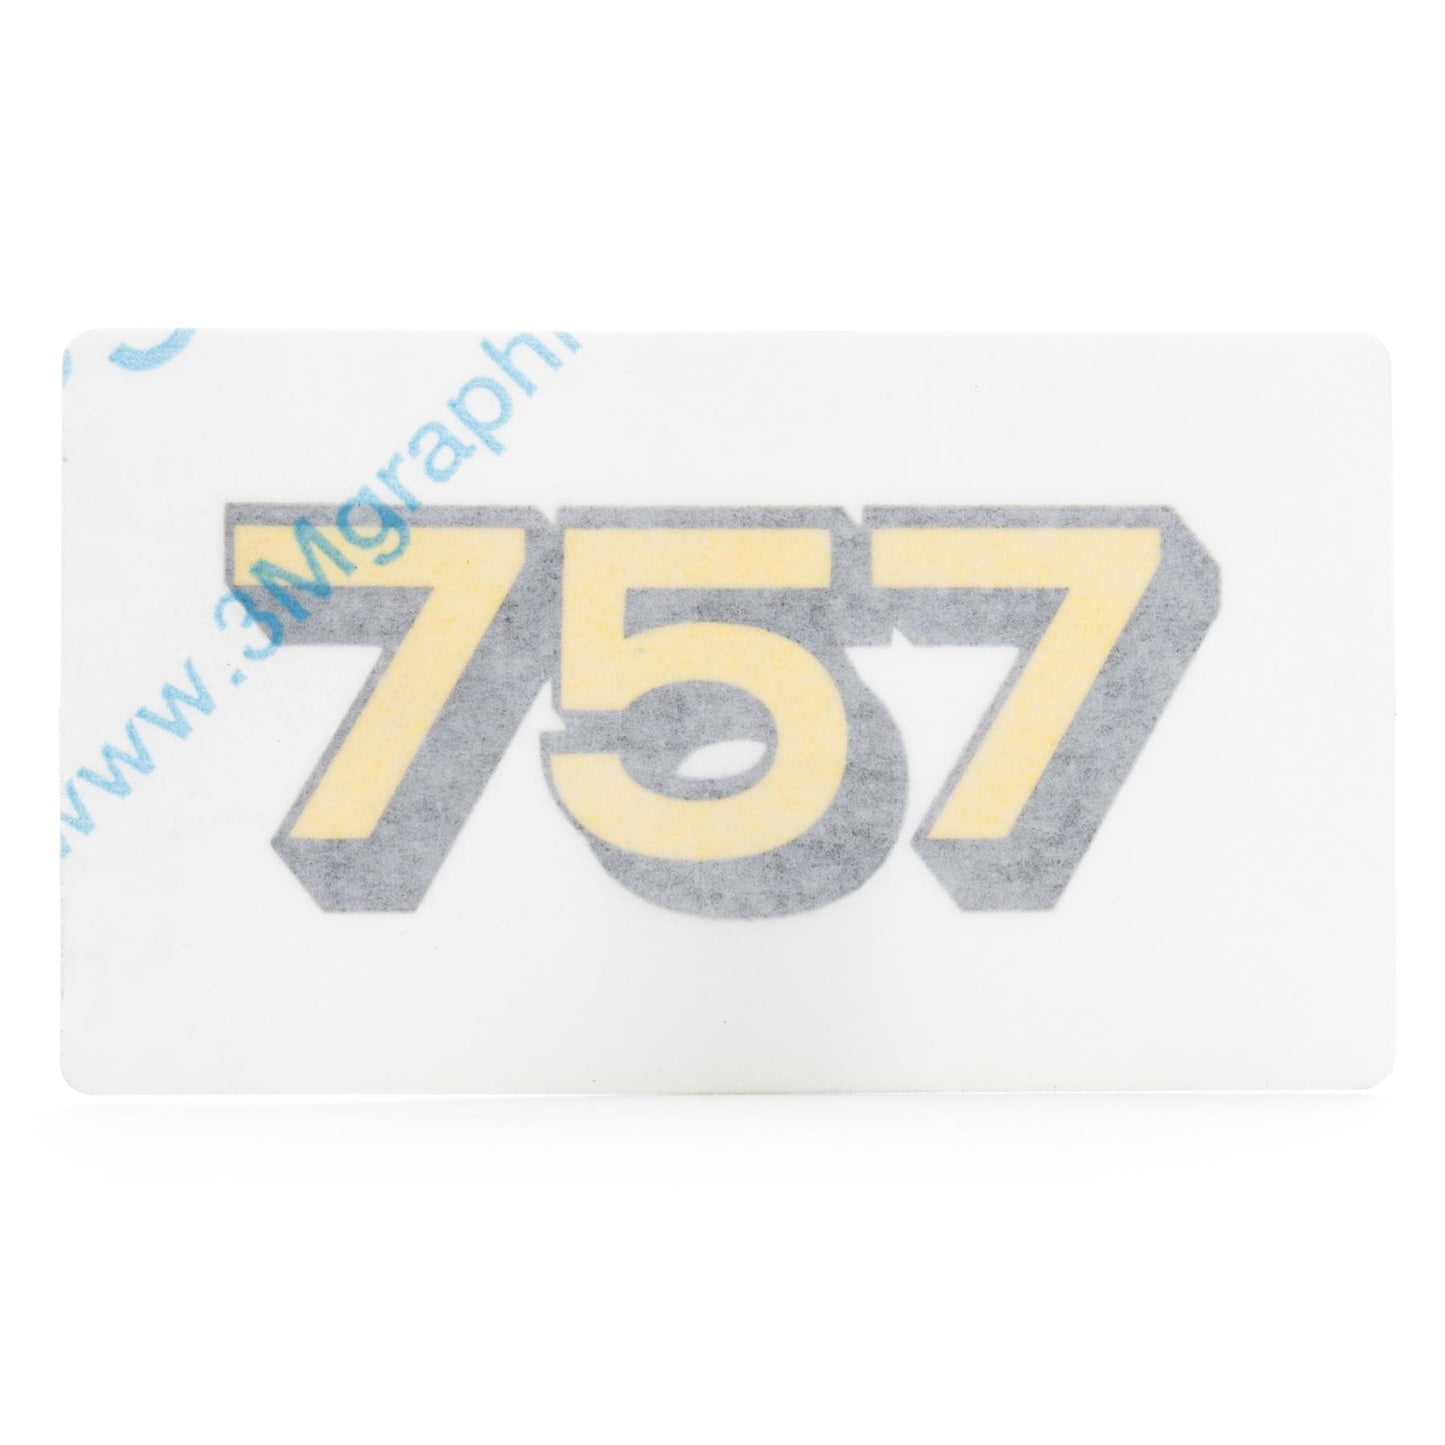 Decal - 757